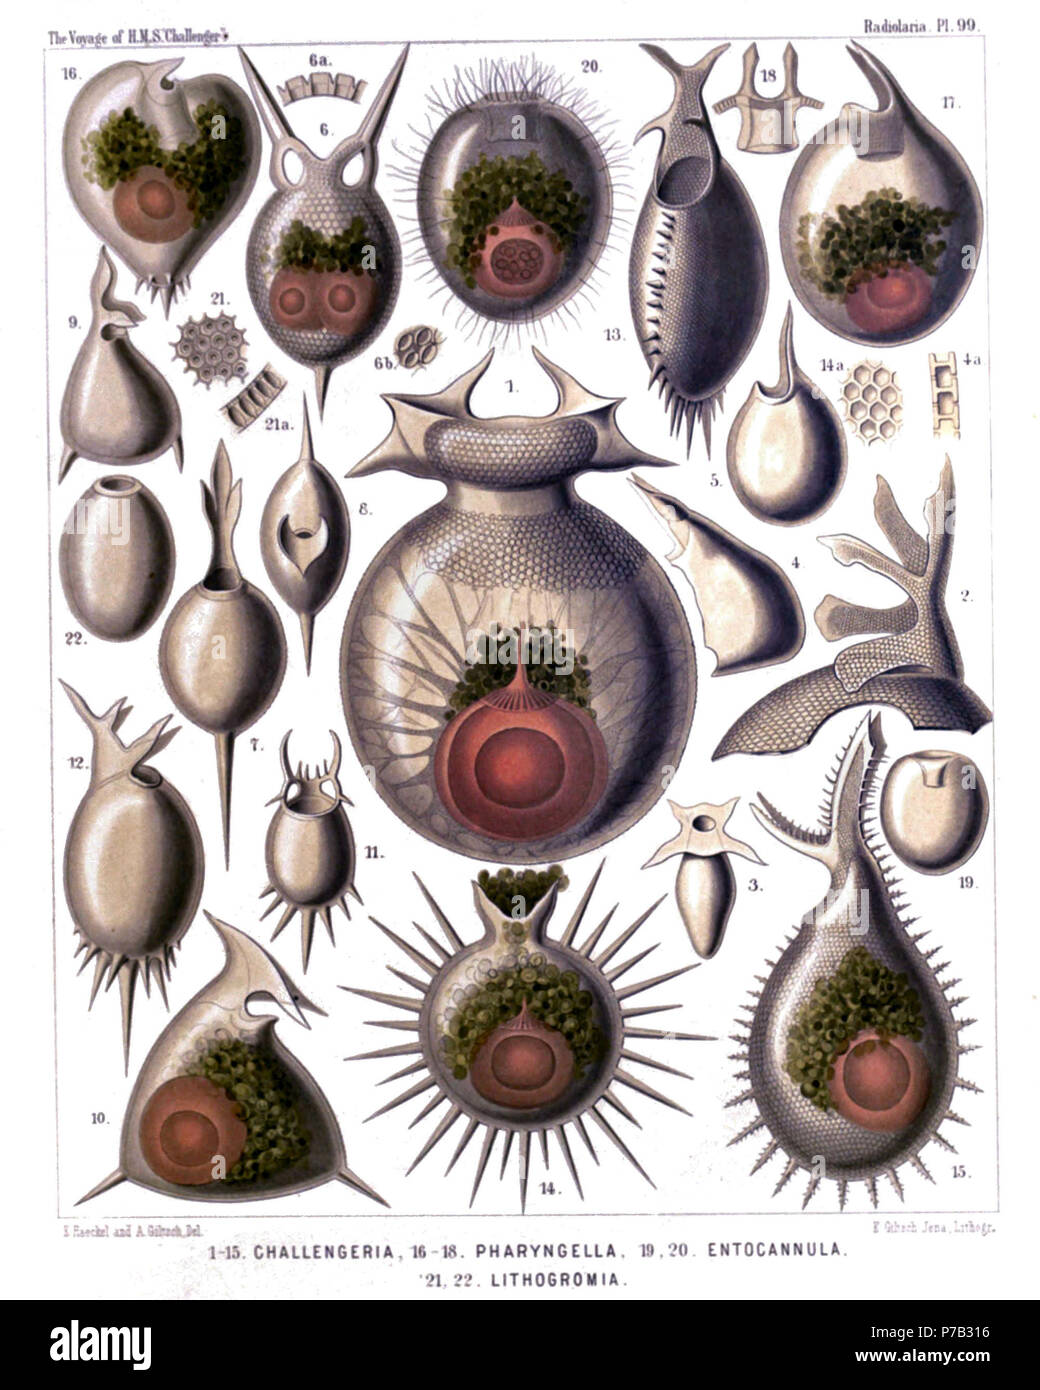 English: Illustration from Report on the Radiolaria collected by H.M.S. Challenger during the years 1873-1876. Part III. Original description follows:  Plate 99. Challengerida.  Diam.  (The central capsule is coloured red and the phæodium green in Figs. 1, 6, 10, 14-17, 20).  Fig. 1. Challengeria murrayi, n. sp., × 50  From the dorsal side. Numerous streams of sarcode arise from the central capsule and pierce the calymma inside the shell.  Fig. 2. Challengeria wildi, n. sp., × 400  The peristome from the left side.  Fig. 3. Challengeria bromleyi, n. sp., × 400  From the dorsal side.  Fig. 4. C Stock Photo